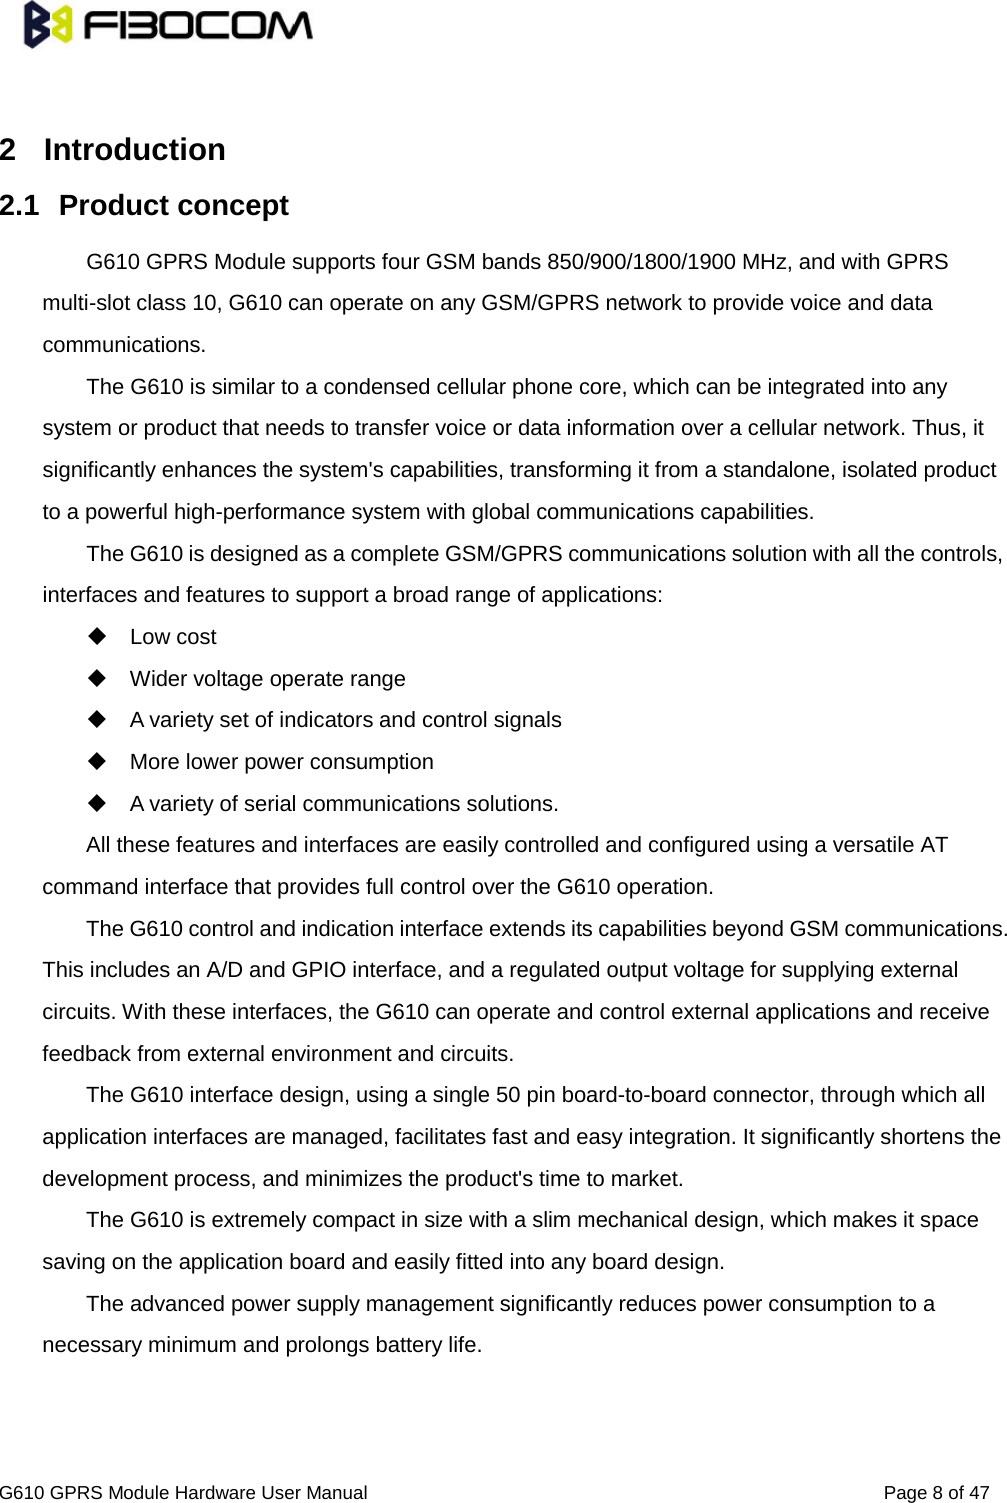                                                                               G610 GPRS Module Hardware User Manual                                                          Page 8 of 47   2  Introduction 2.1 Product concept G610 GPRS Module supports four GSM bands 850/900/1800/1900 MHz, and with GPRS multi-slot class 10, G610 can operate on any GSM/GPRS network to provide voice and data communications.   The G610 is similar to a condensed cellular phone core, which can be integrated into any system or product that needs to transfer voice or data information over a cellular network. Thus, it significantly enhances the system&apos;s capabilities, transforming it from a standalone, isolated product to a powerful high-performance system with global communications capabilities.   The G610 is designed as a complete GSM/GPRS communications solution with all the controls, interfaces and features to support a broad range of applications:    Low cost  Wider voltage operate range  A variety set of indicators and control signals    More lower power consumption  A variety of serial communications solutions.   All these features and interfaces are easily controlled and configured using a versatile AT command interface that provides full control over the G610 operation.   The G610 control and indication interface extends its capabilities beyond GSM communications. This includes an A/D and GPIO interface, and a regulated output voltage for supplying external circuits. With these interfaces, the G610 can operate and control external applications and receive feedback from external environment and circuits.   The G610 interface design, using a single 50 pin board-to-board connector, through which all application interfaces are managed, facilitates fast and easy integration. It significantly shortens the development process, and minimizes the product&apos;s time to market.   The G610 is extremely compact in size with a slim mechanical design, which makes it space saving on the application board and easily fitted into any board design.   The advanced power supply management significantly reduces power consumption to a necessary minimum and prolongs battery life.   